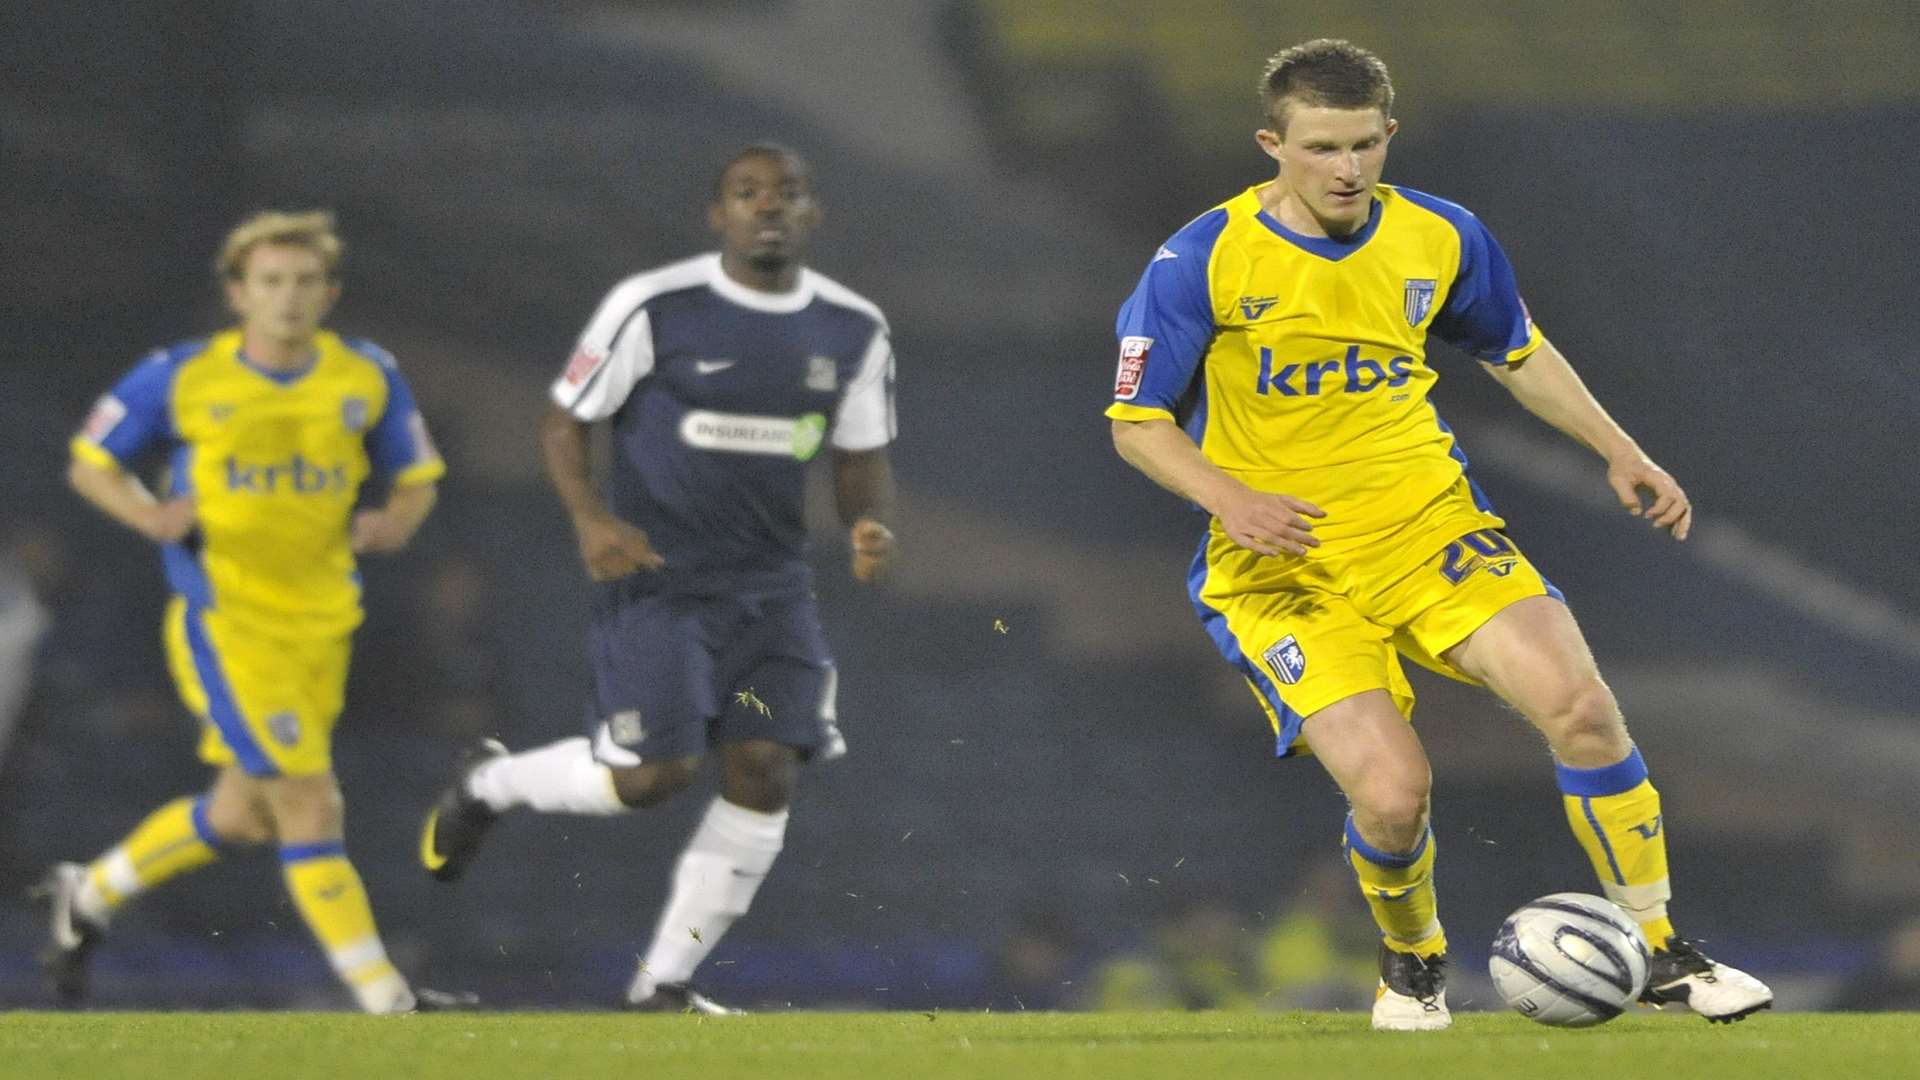 Matt Fry pictured during his loan spell at Gillingham